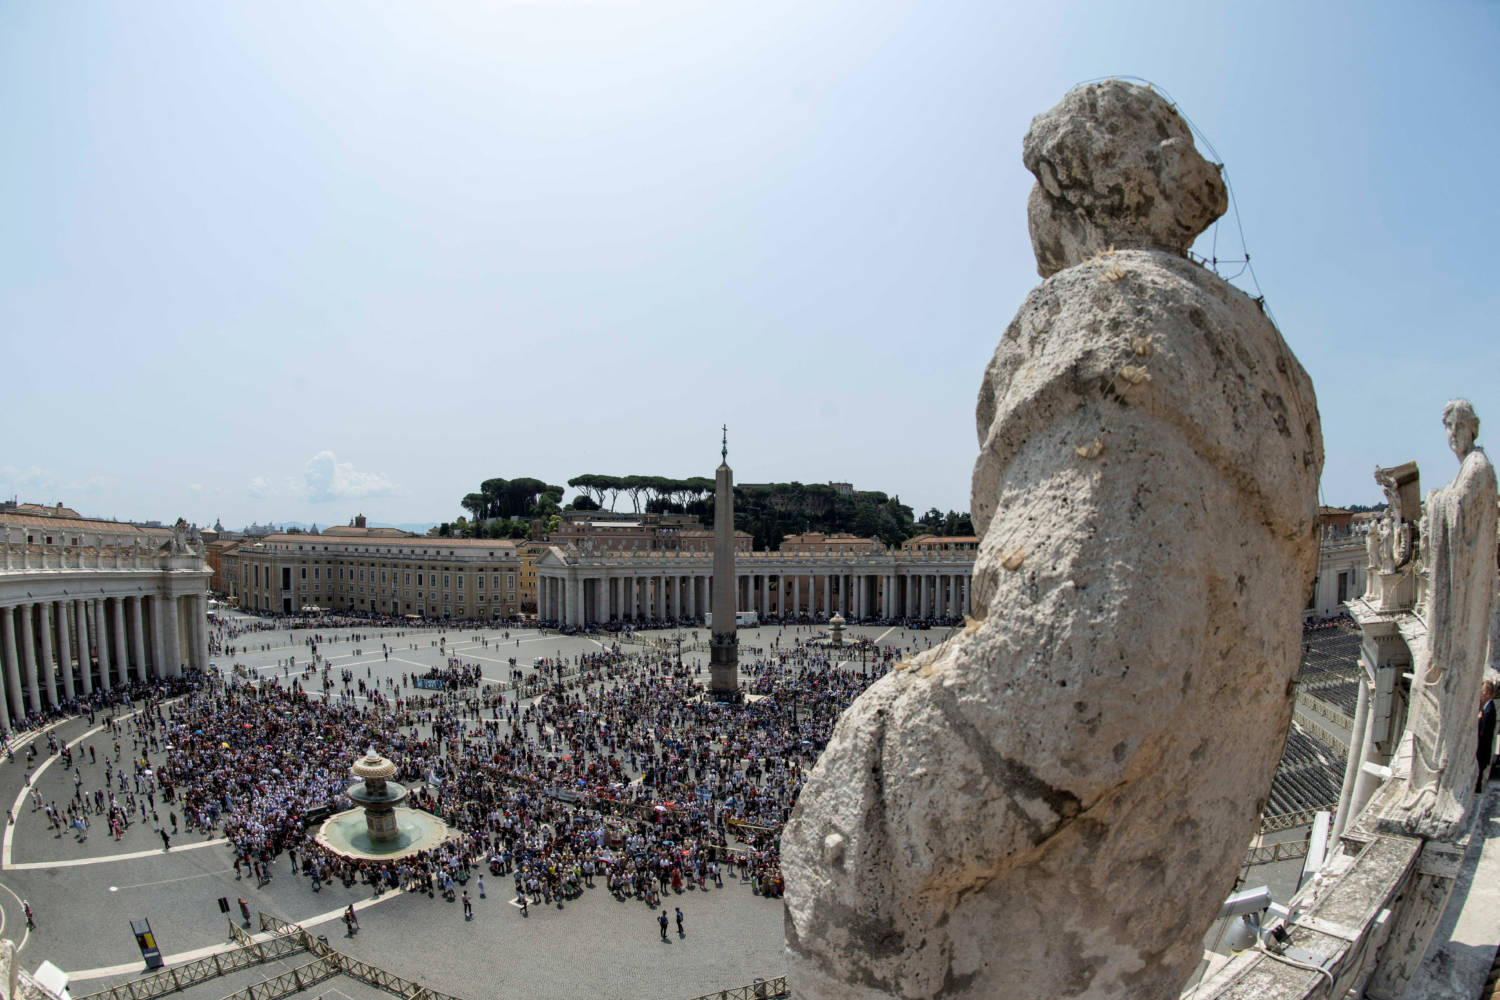 Pope Francis Leads The Angelus Prayer At Saint Peter's Square, At The Vatican